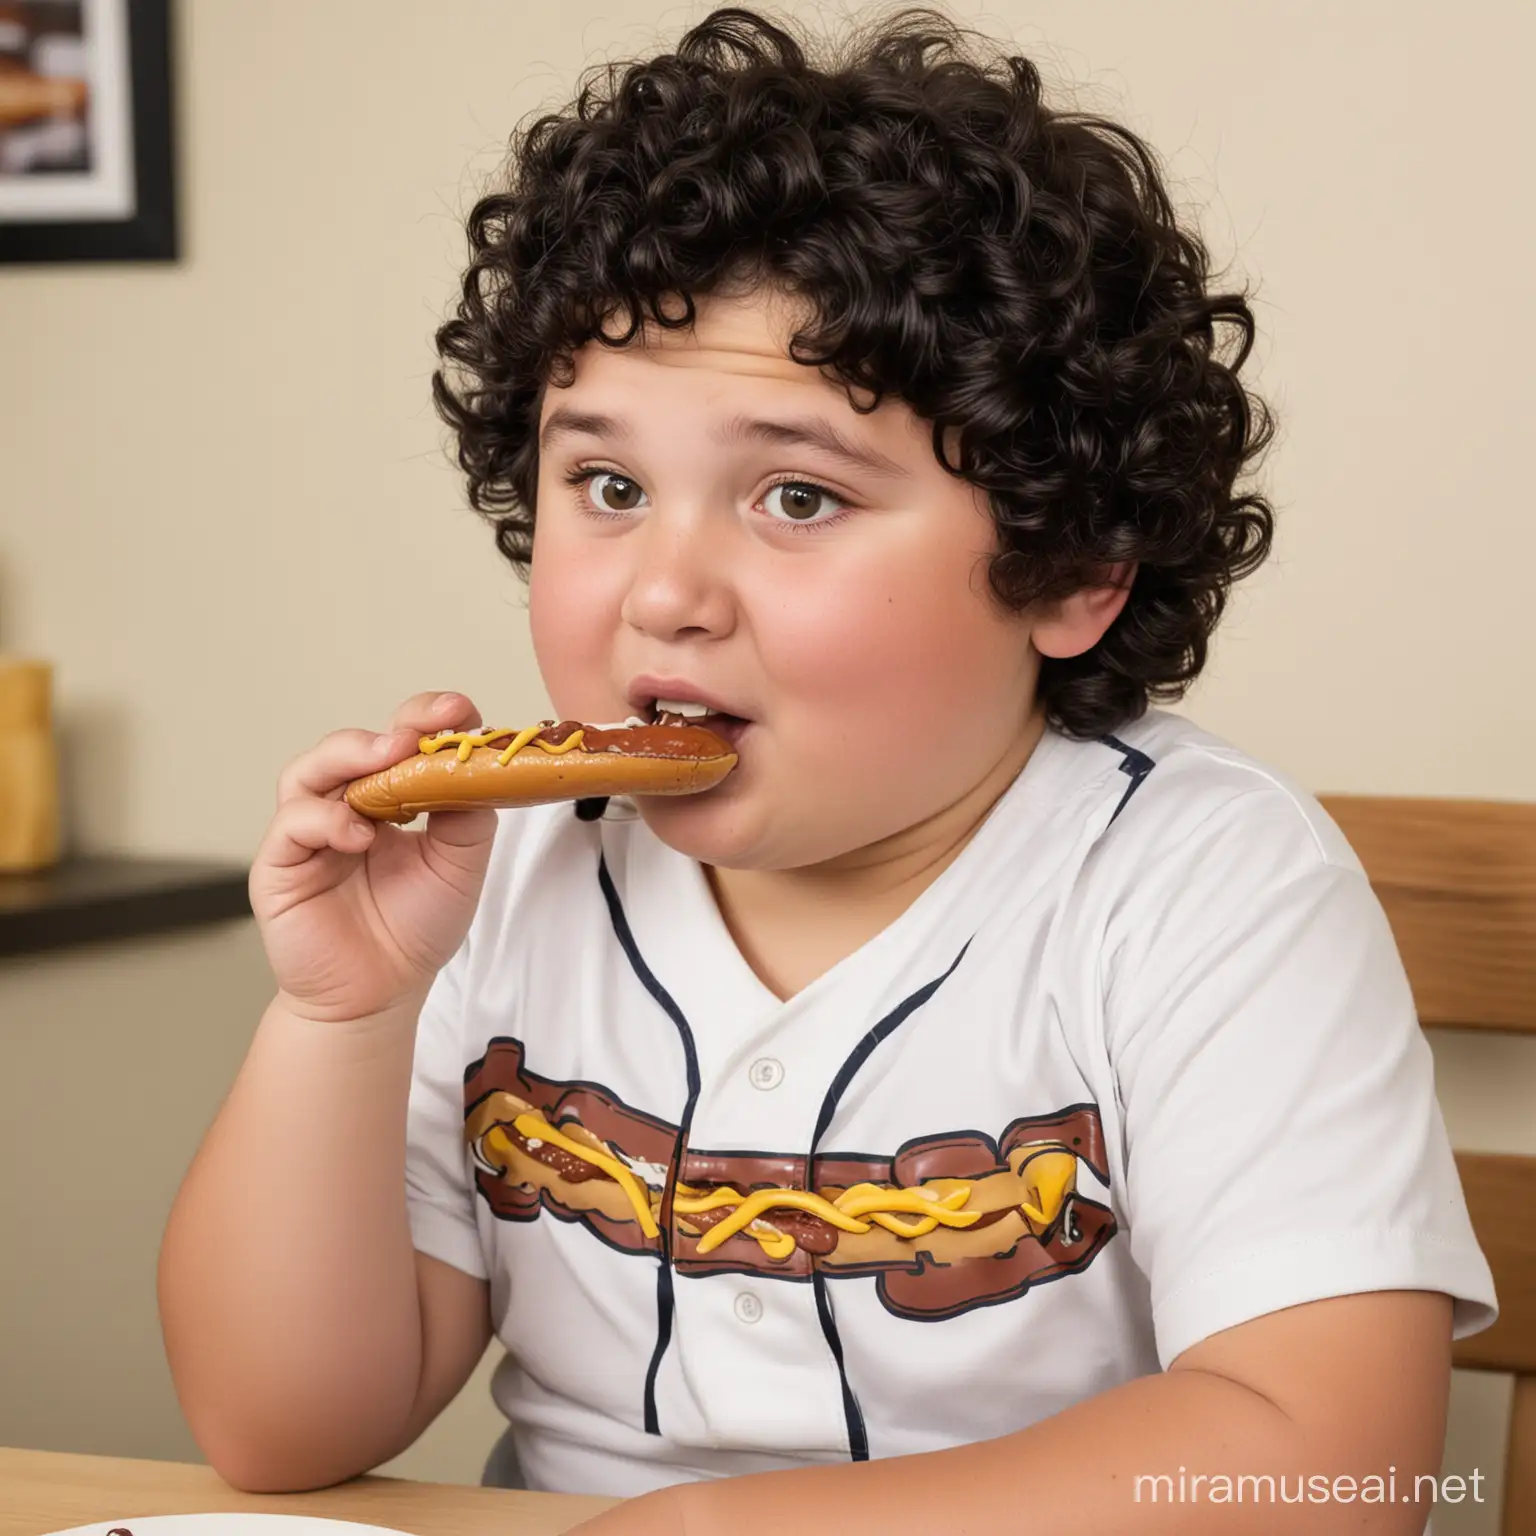 CurlyHaired Baseball Fan Enjoying Hot Dogs at the Game